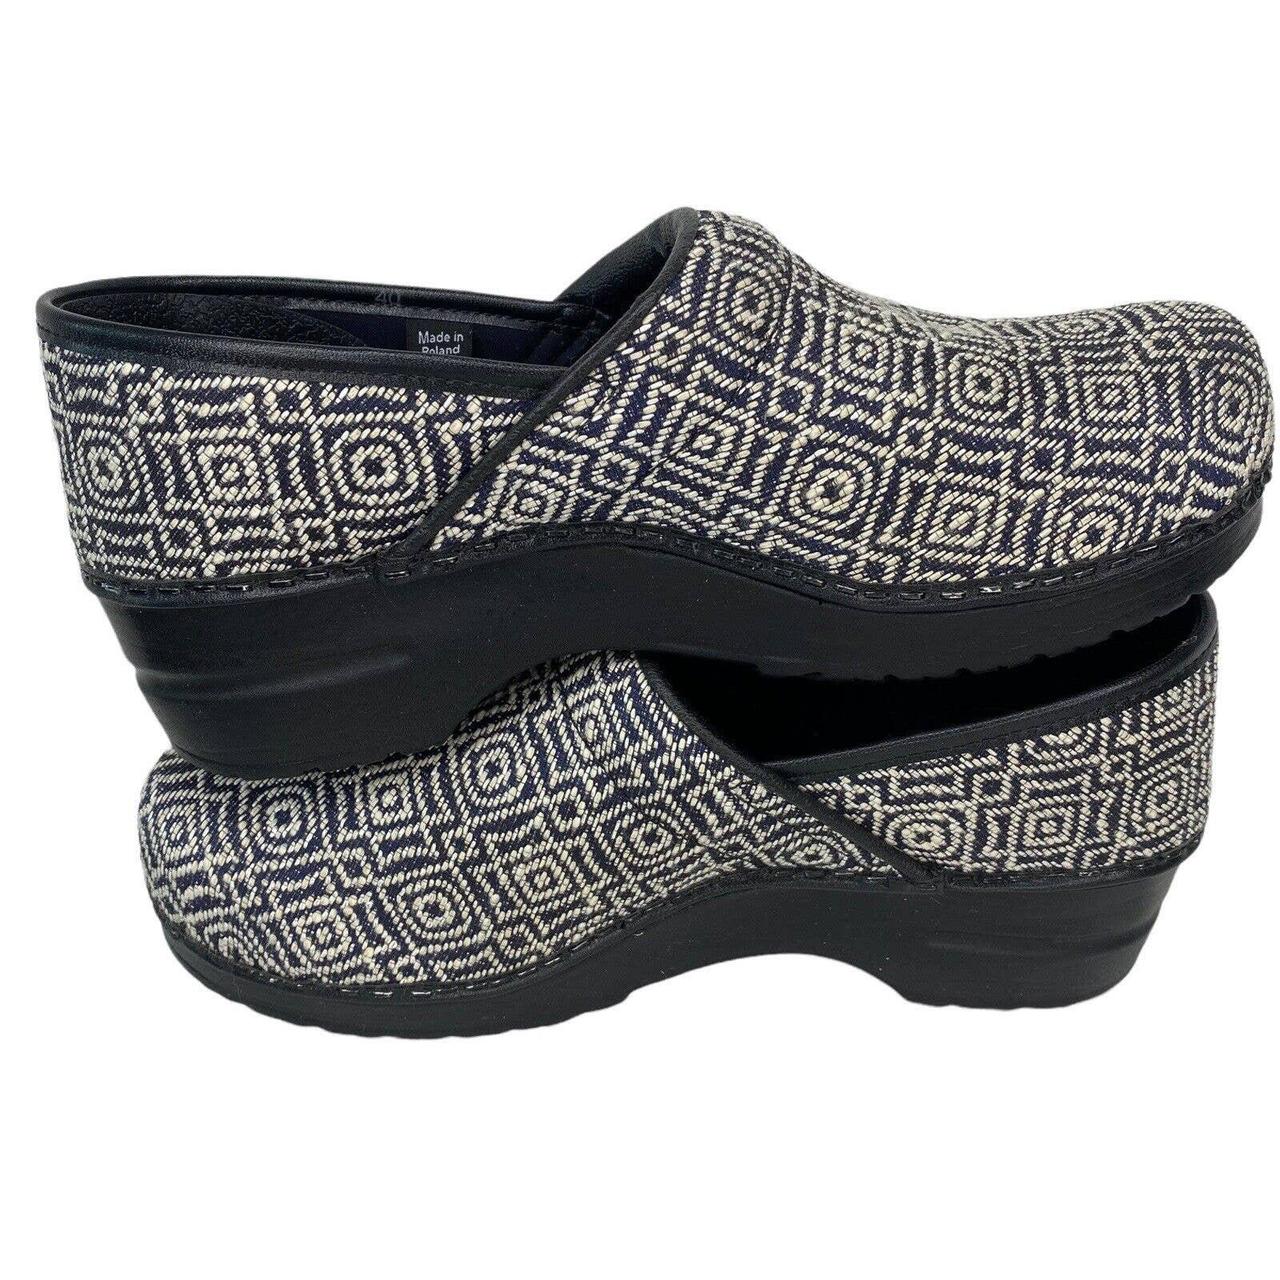 Product Image 2 - These Sanita clogs are in